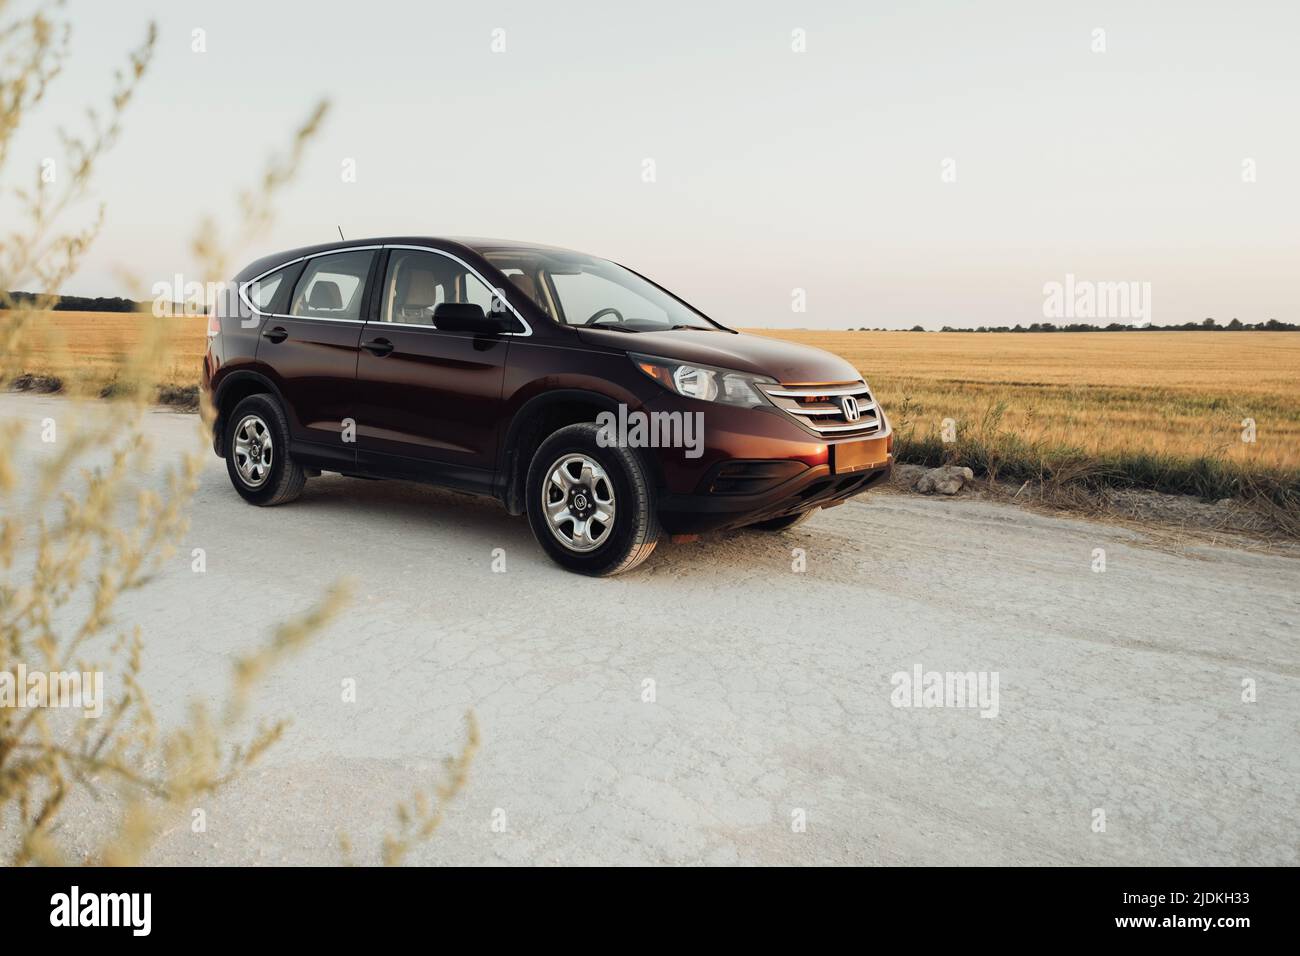 TERNOPIL, Ukraine - July 21 2021: Honda CR-V on the Country Road Stock Photo